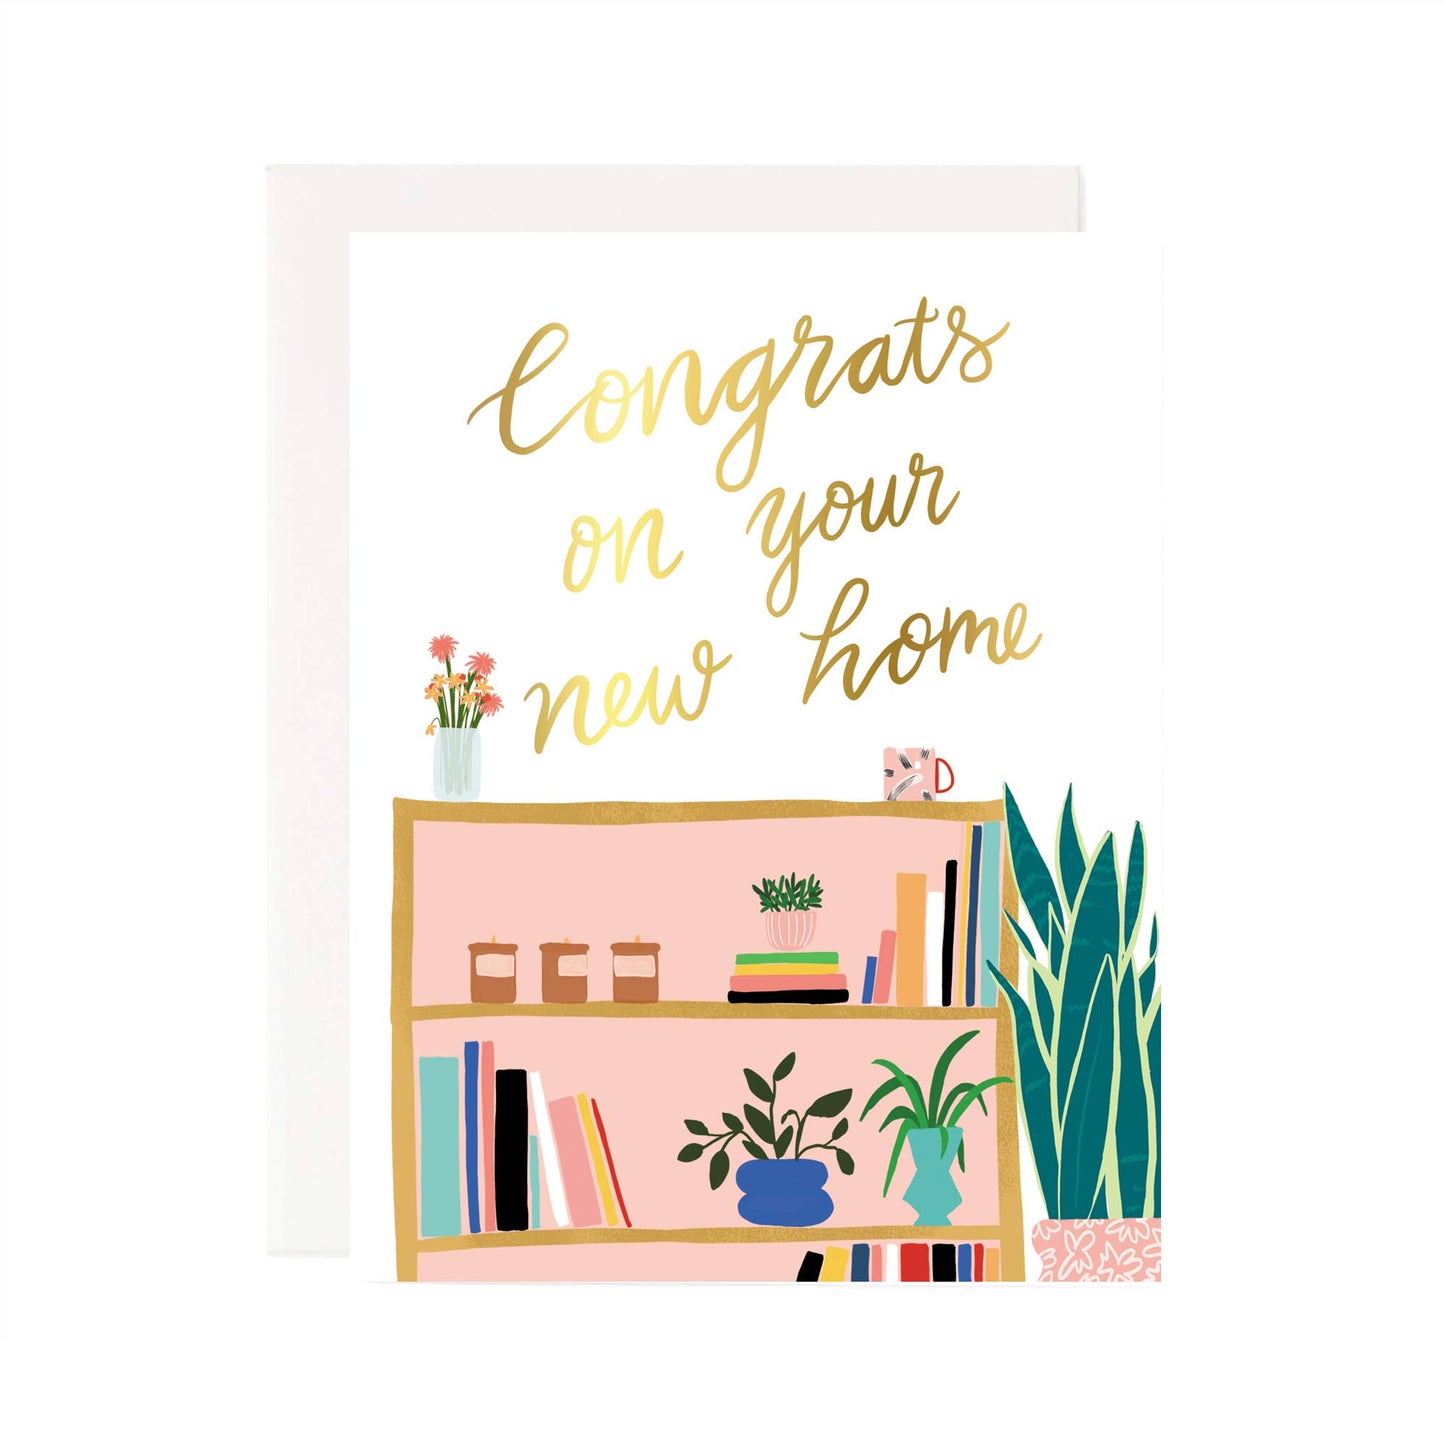 "Congrats on your new home" gold text on white background with artistic drawing of a shelf containing books, candles, and plants.